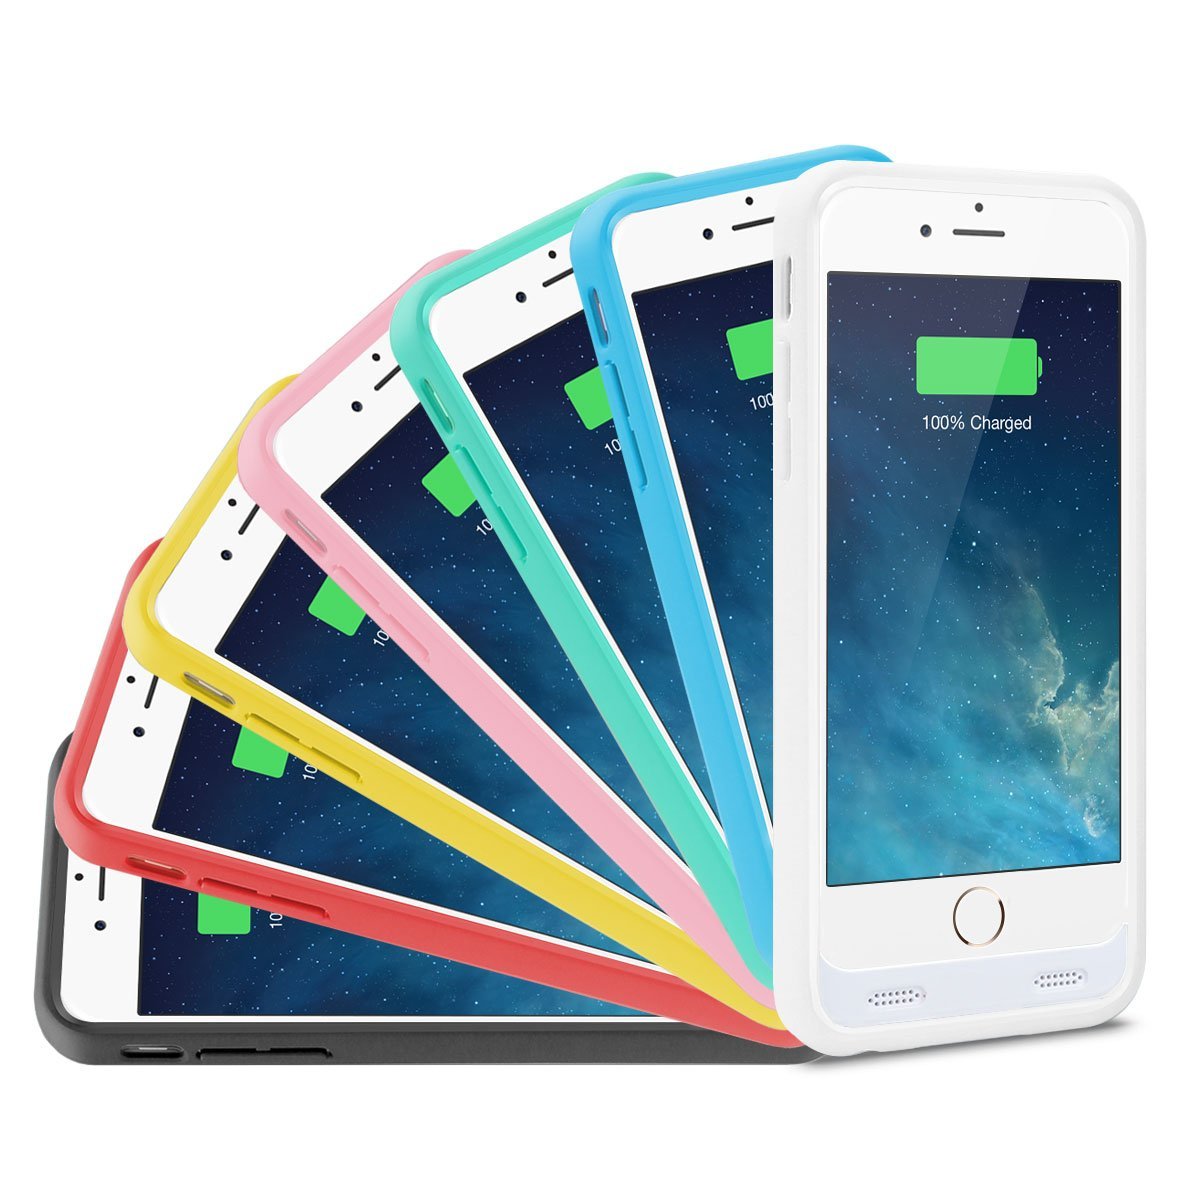 1byone iPhone battery case rainbow bands